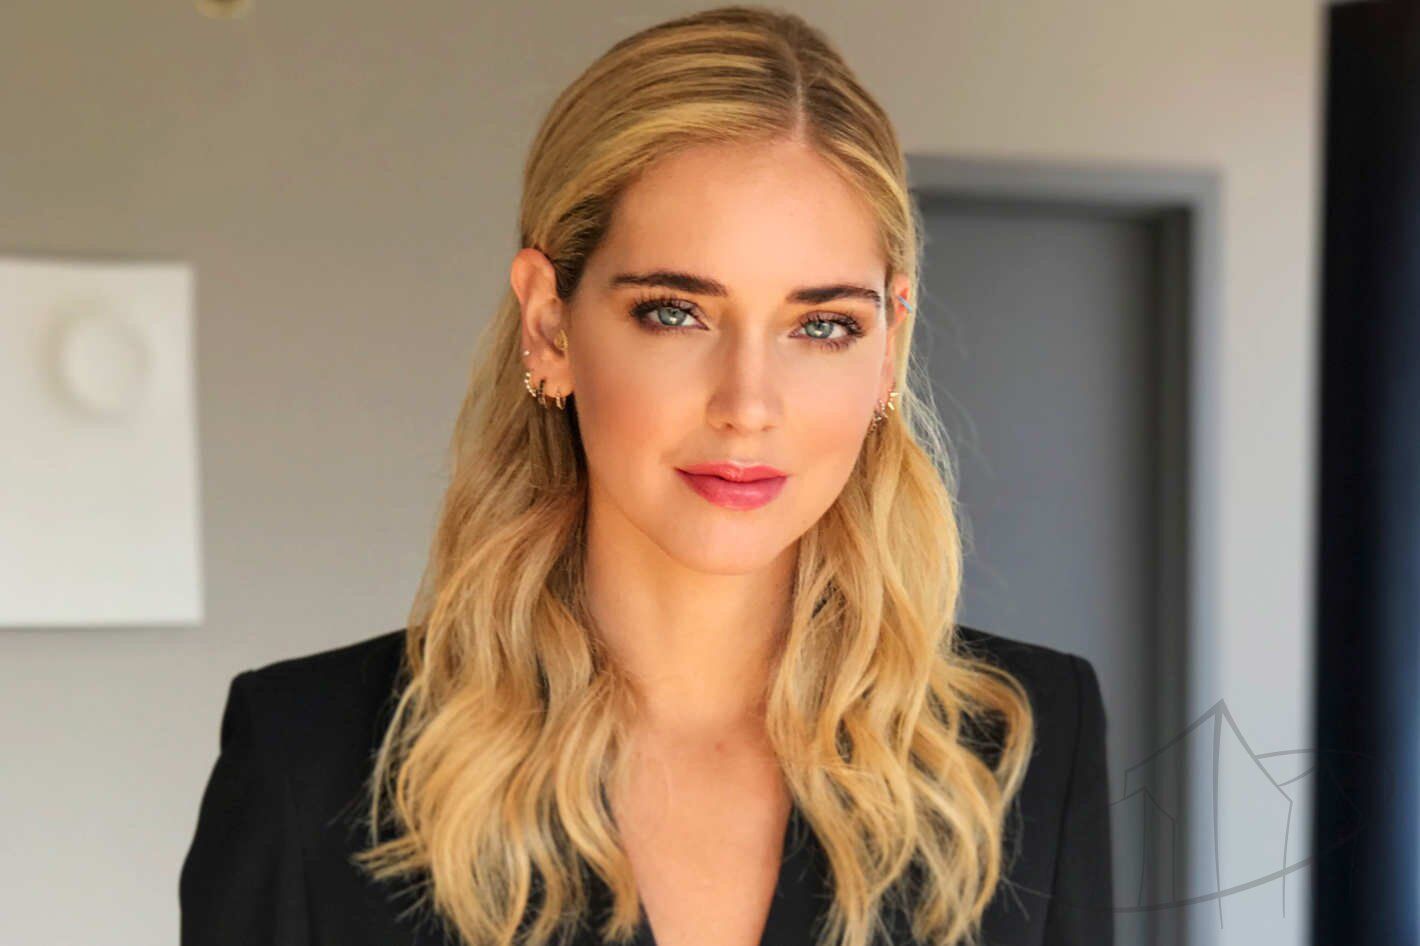 Who is Chiara Ferragni & Why Is She Globally Famous?